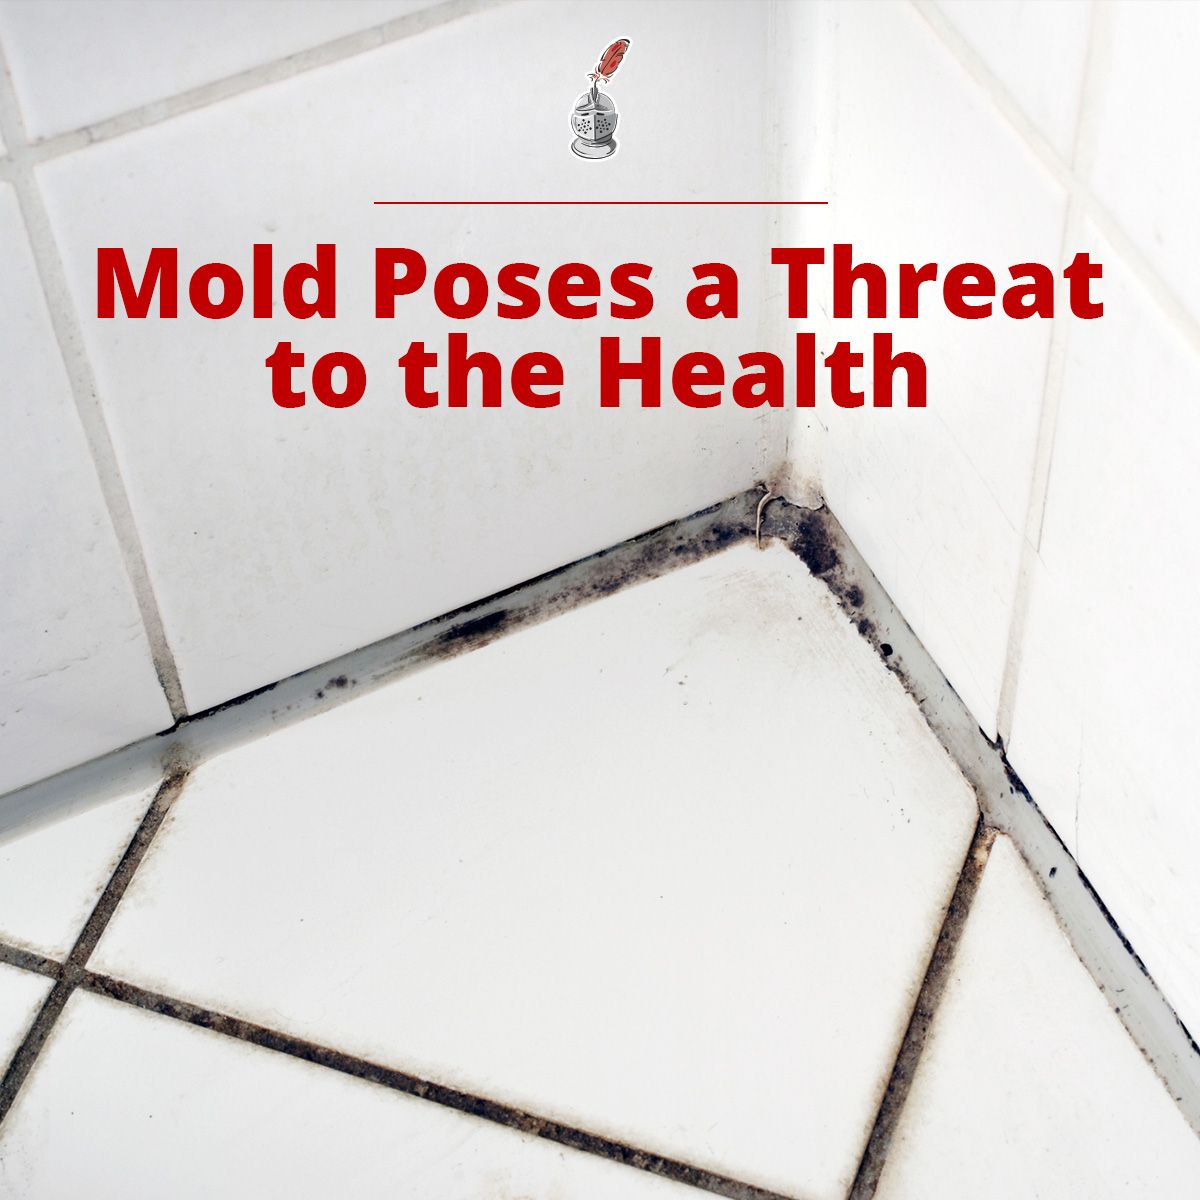 Mold Poses a Threat to the Health